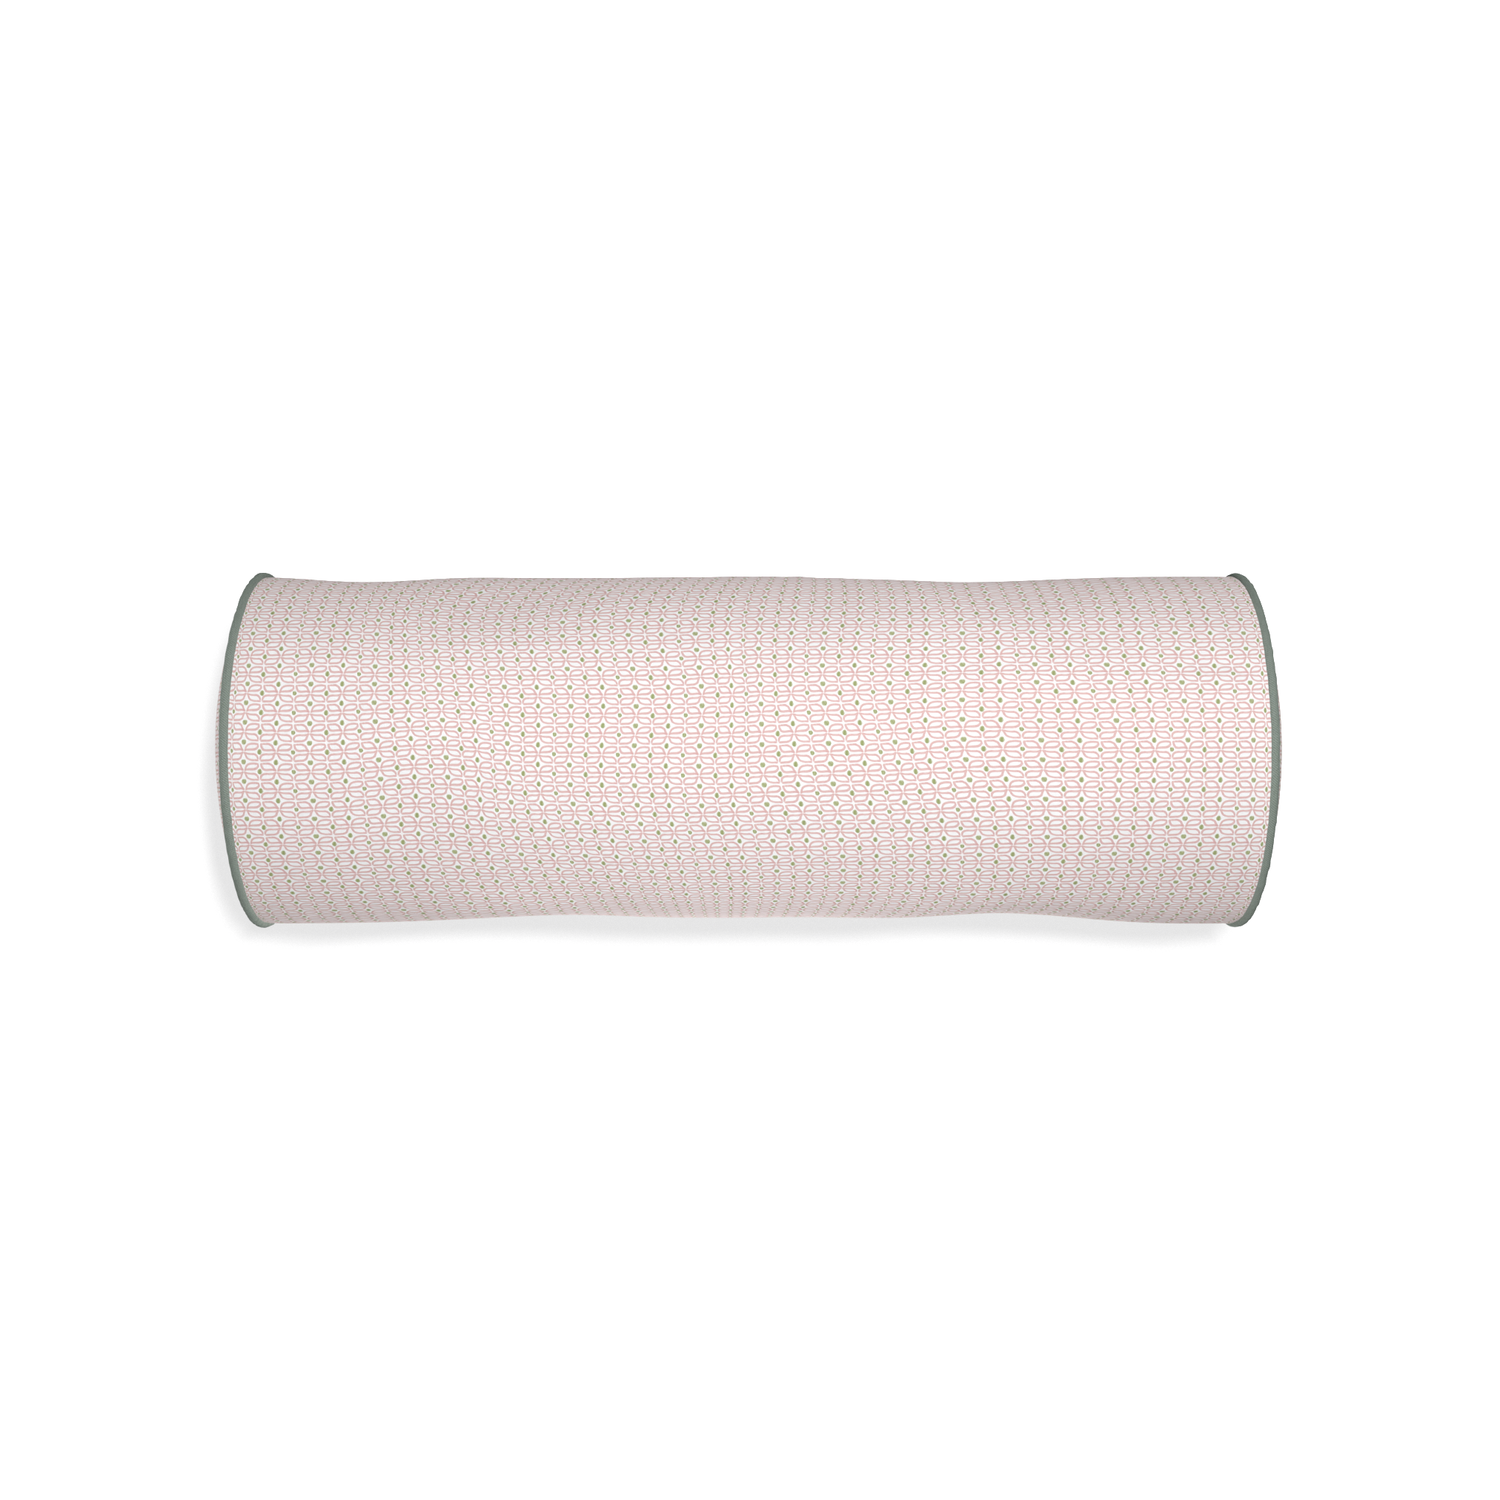 Bolster loomi pink custom pink geometricpillow with sage piping on white background